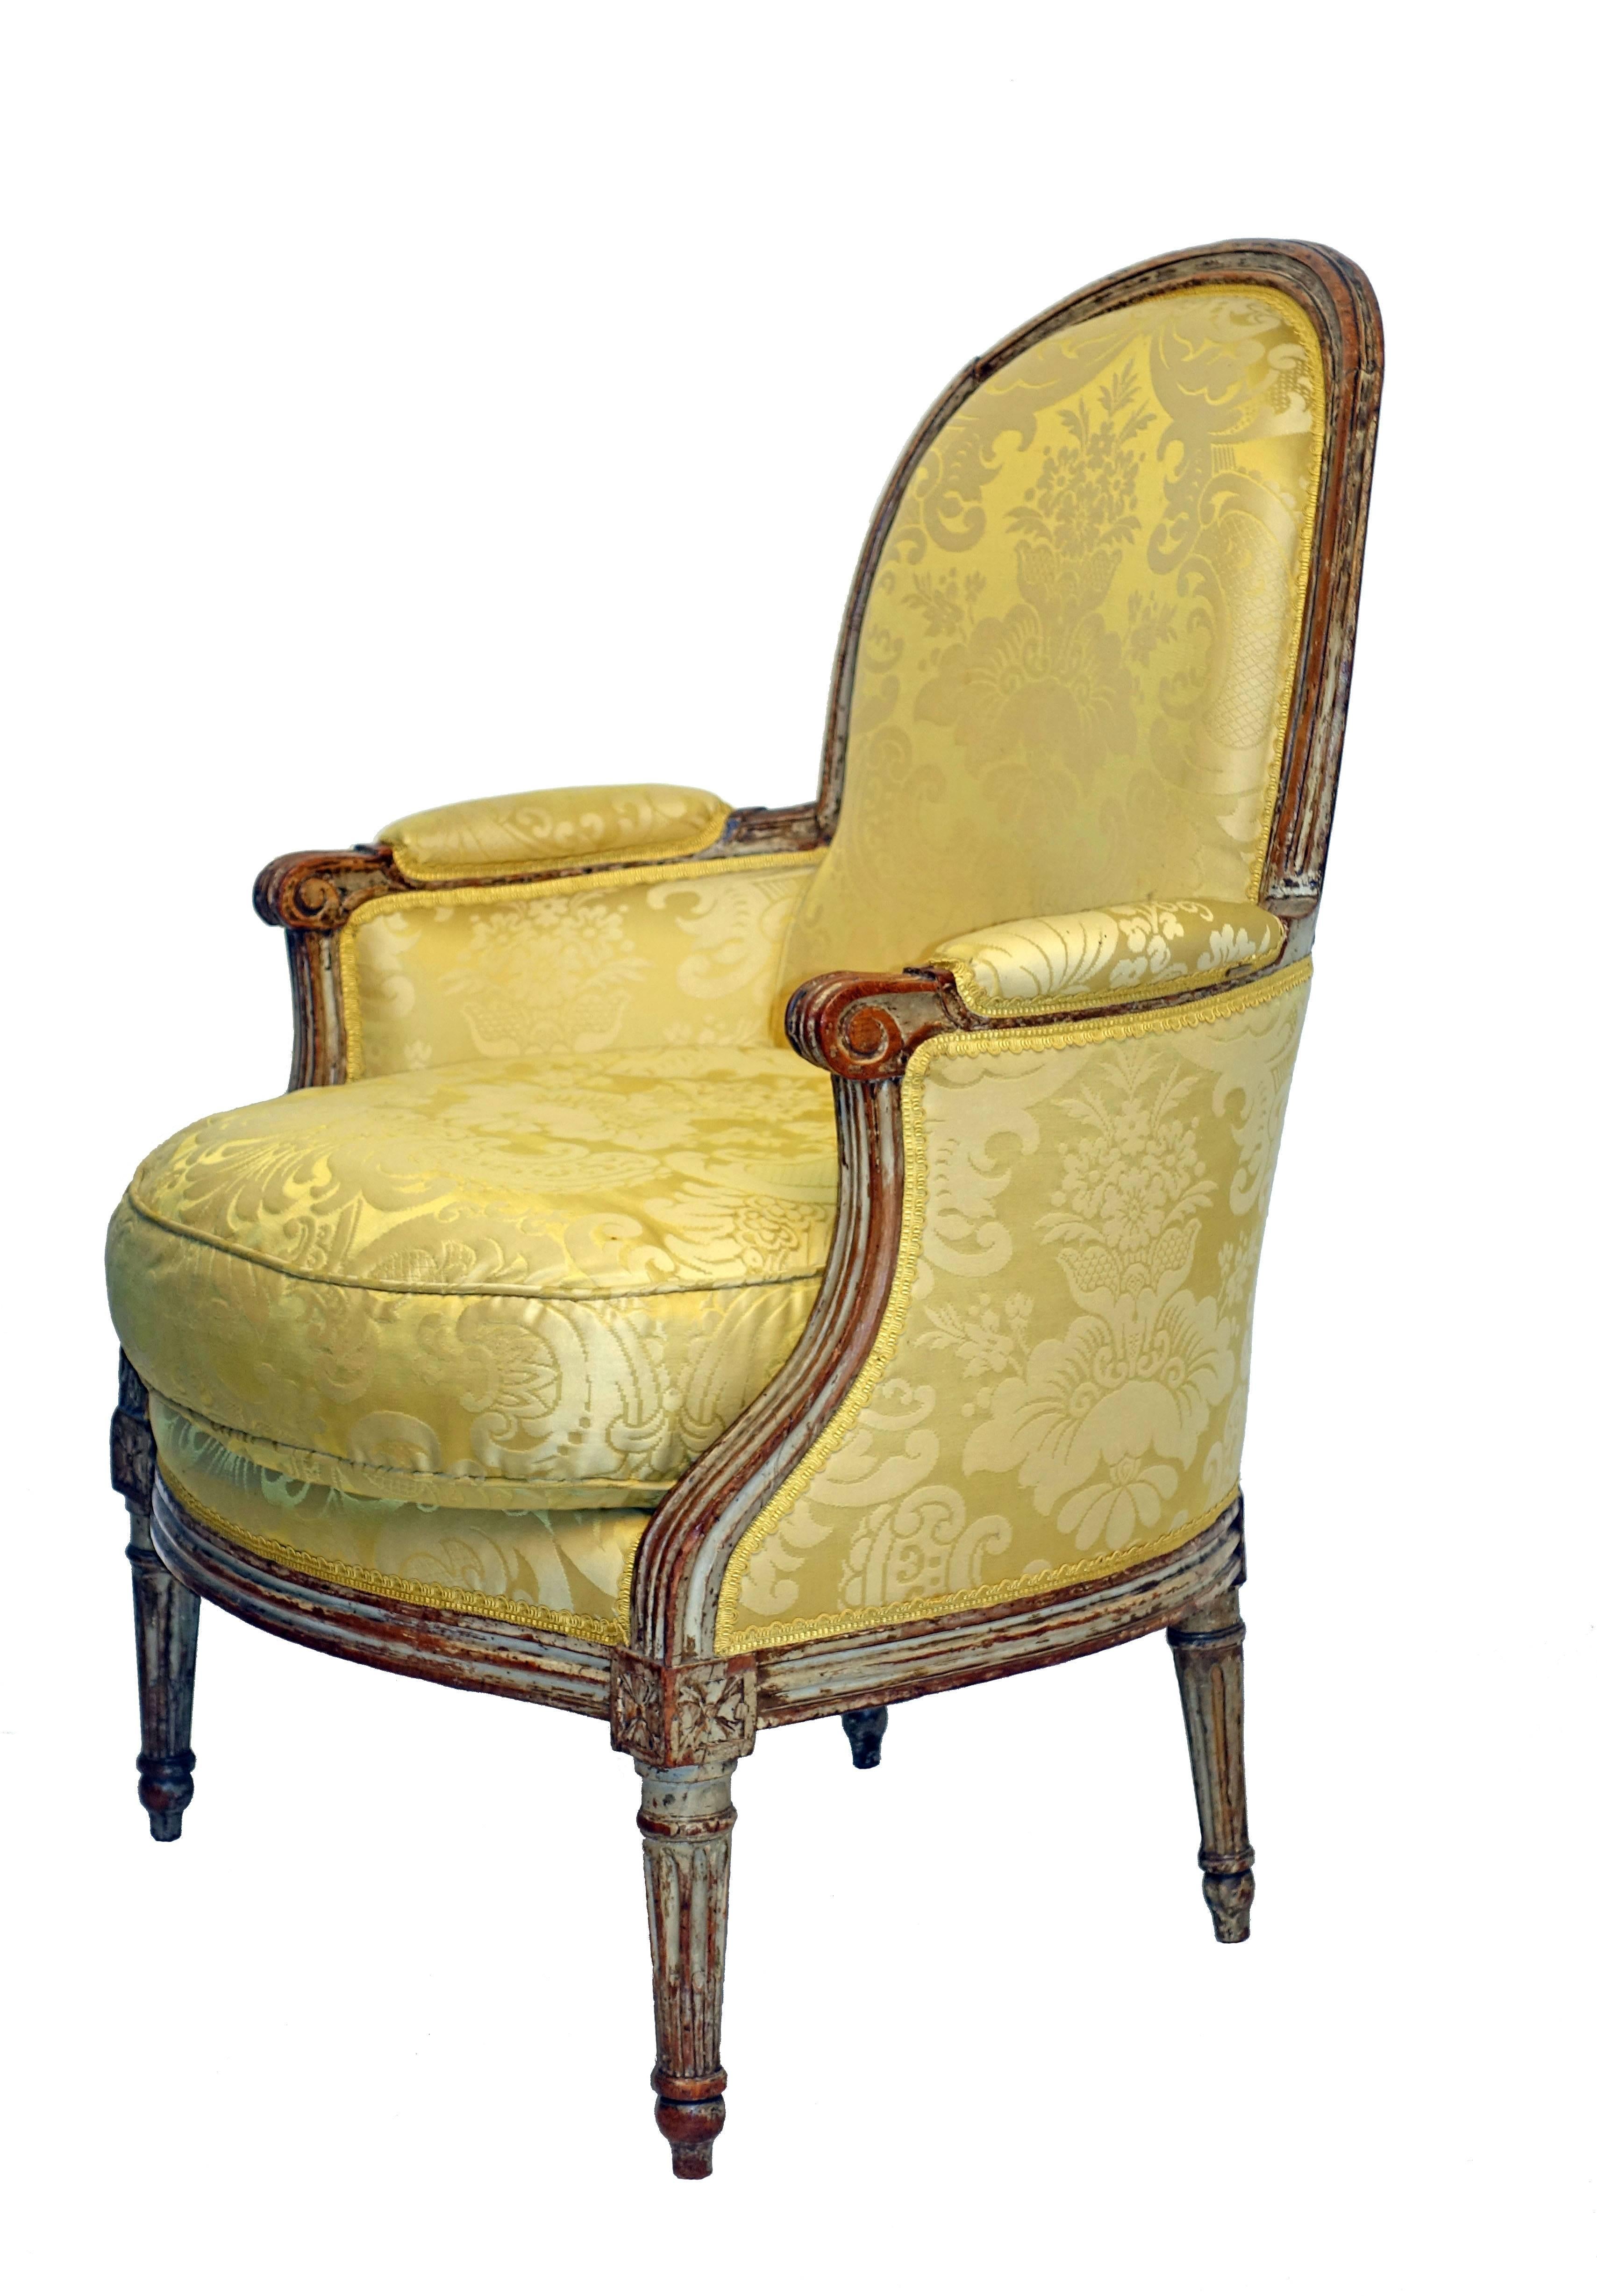 Carved and painted Louis XV style Bergere chair, having silk damask upholstery and a down cushion. Upholstery is in very good condition. France, late 19th-early 20th century.